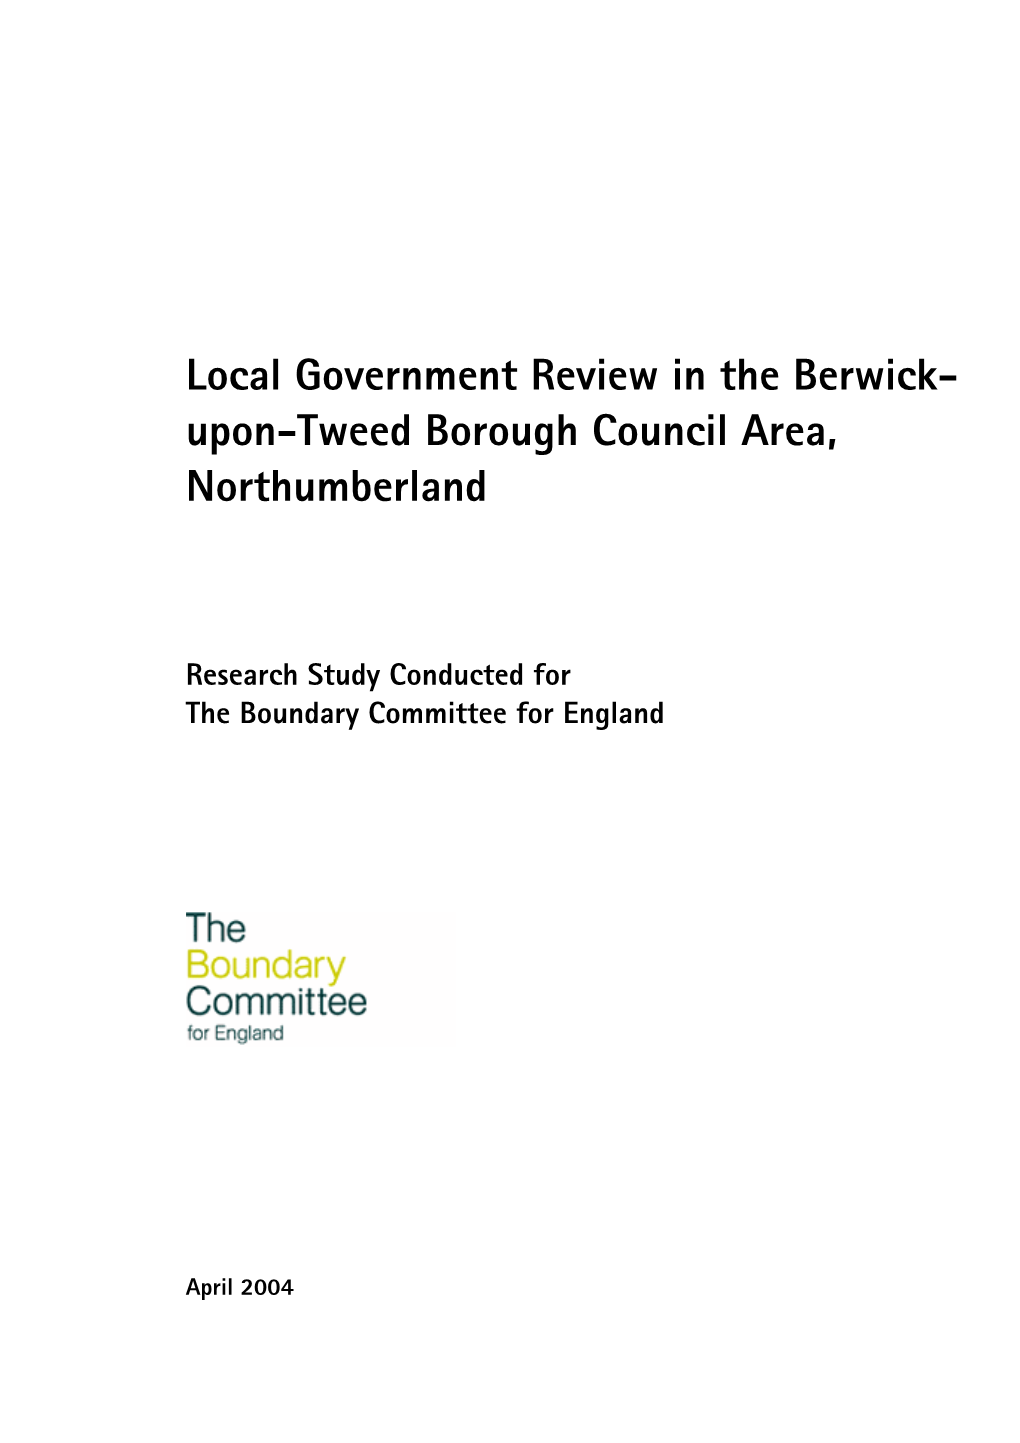 Local Government Review in the Berwick- Upon-Tweed Borough Council Area, Northumberland